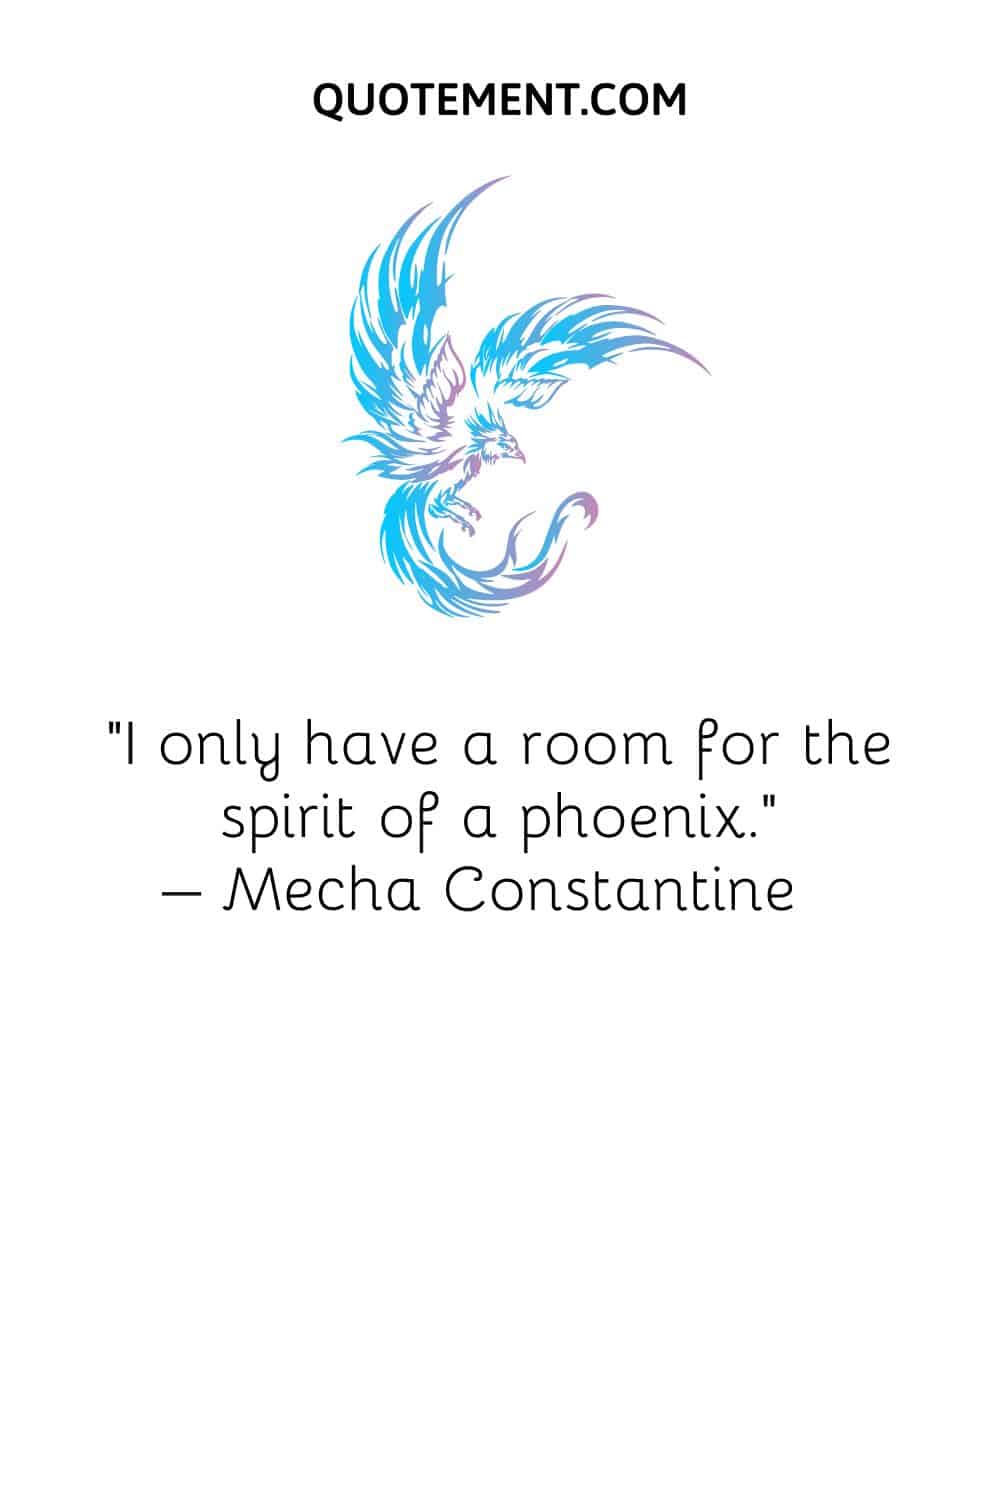 I only have a room for the spirit of a phoenix